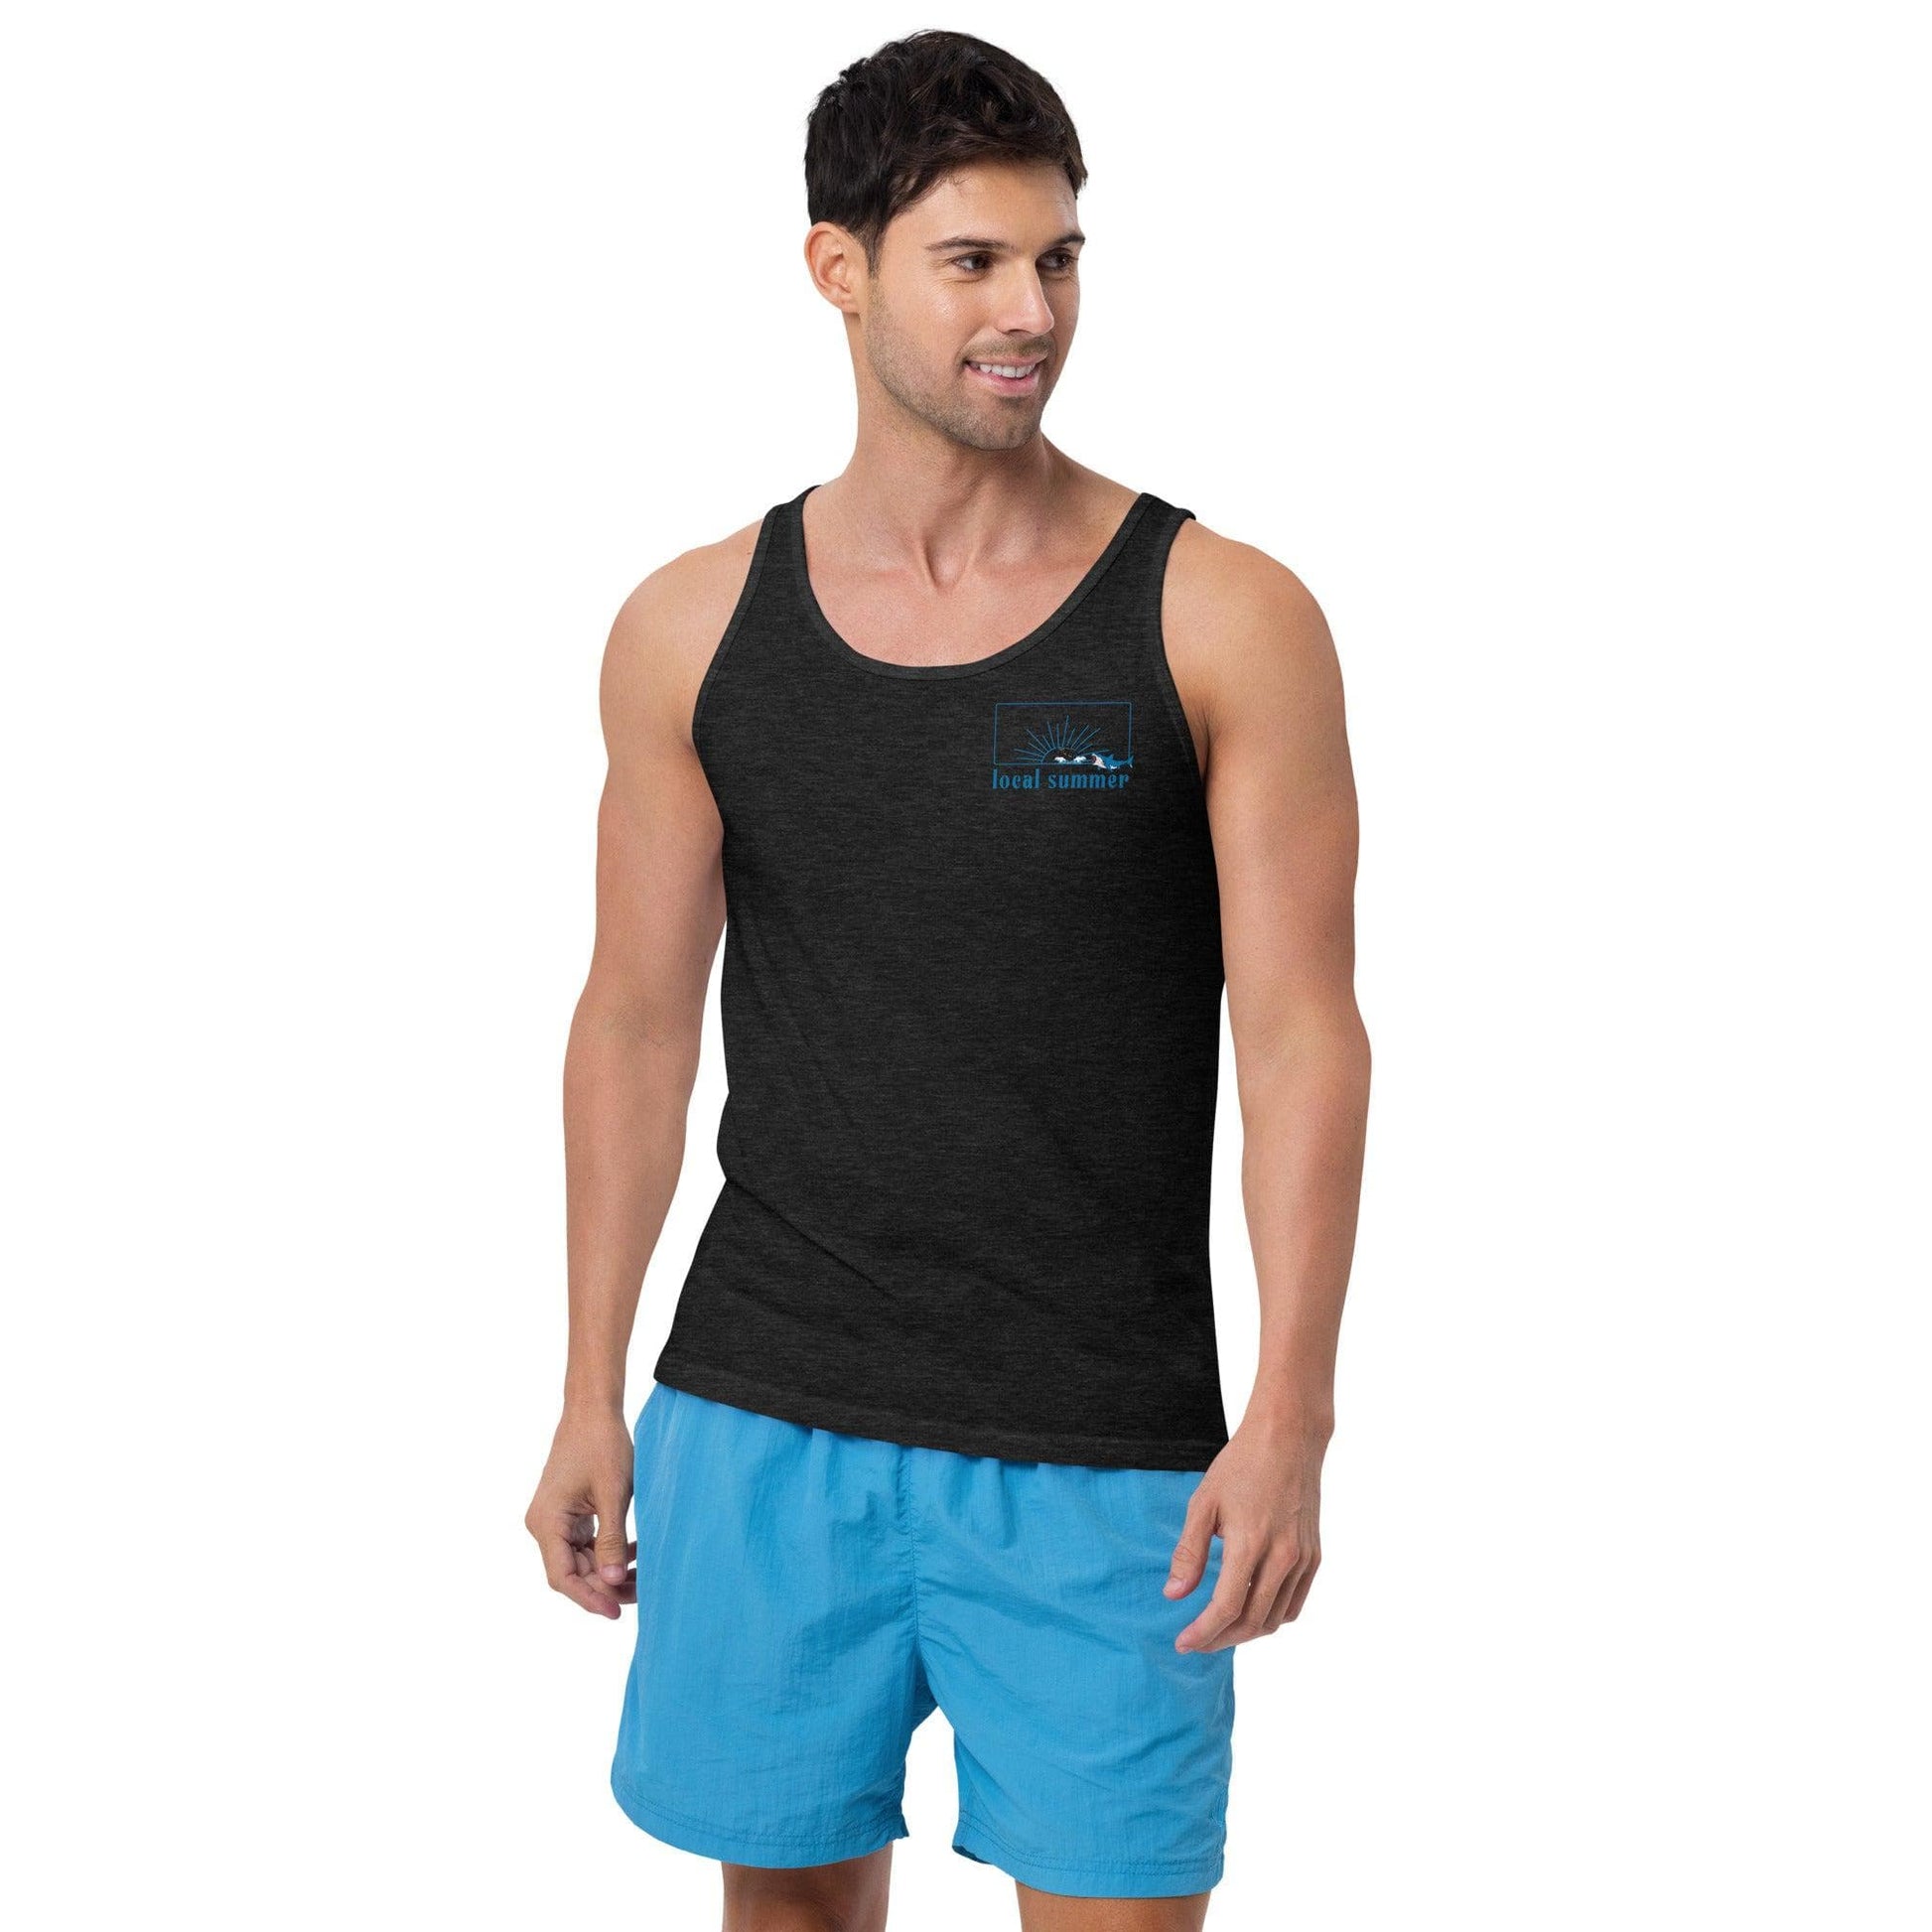 Local Summer Collective Megalodon Unisex Tank Top